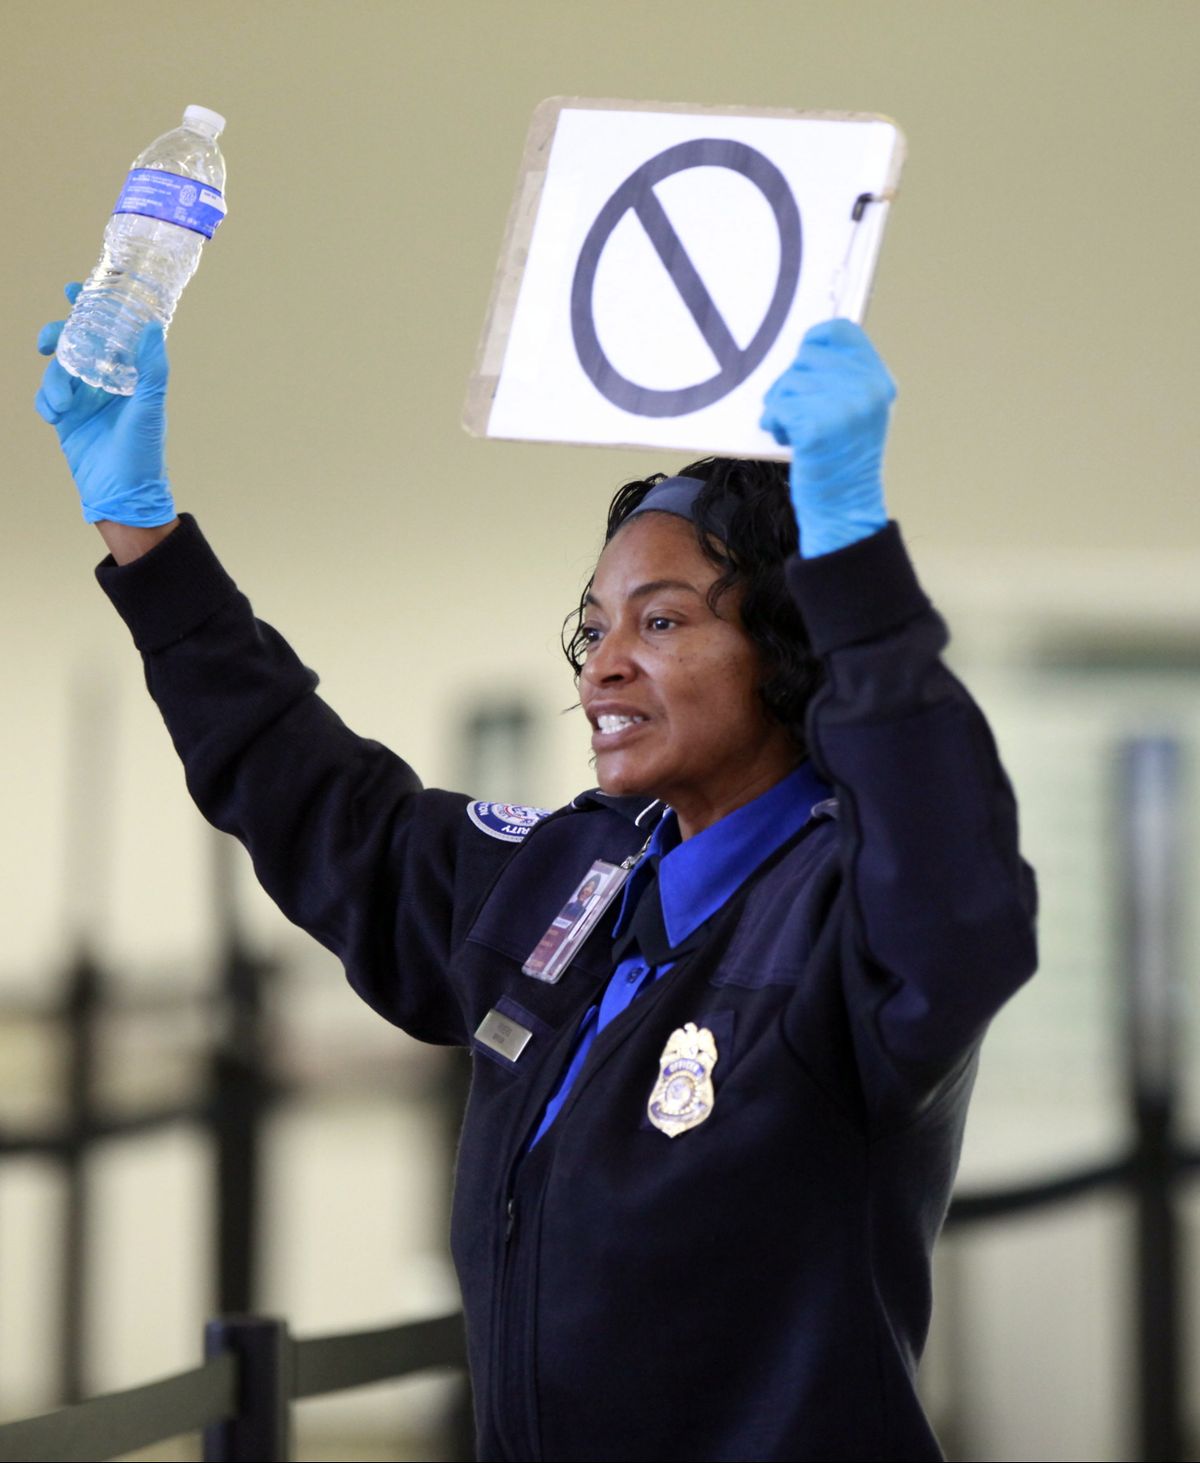 A TSA employee advises travelers that liquids are not allowed through the gate at at the Los Angeles International Airport Wednesday, Oct. 10, 2012.  In an age when travelers have to toss bottled water at airport security checkpoints, what may be most striking about the arrest of a passenger from Japan wearing a bulletproof vest and flying with checked luggage loaded with a cache of weapons, shackles and body bags is that most of it wasn